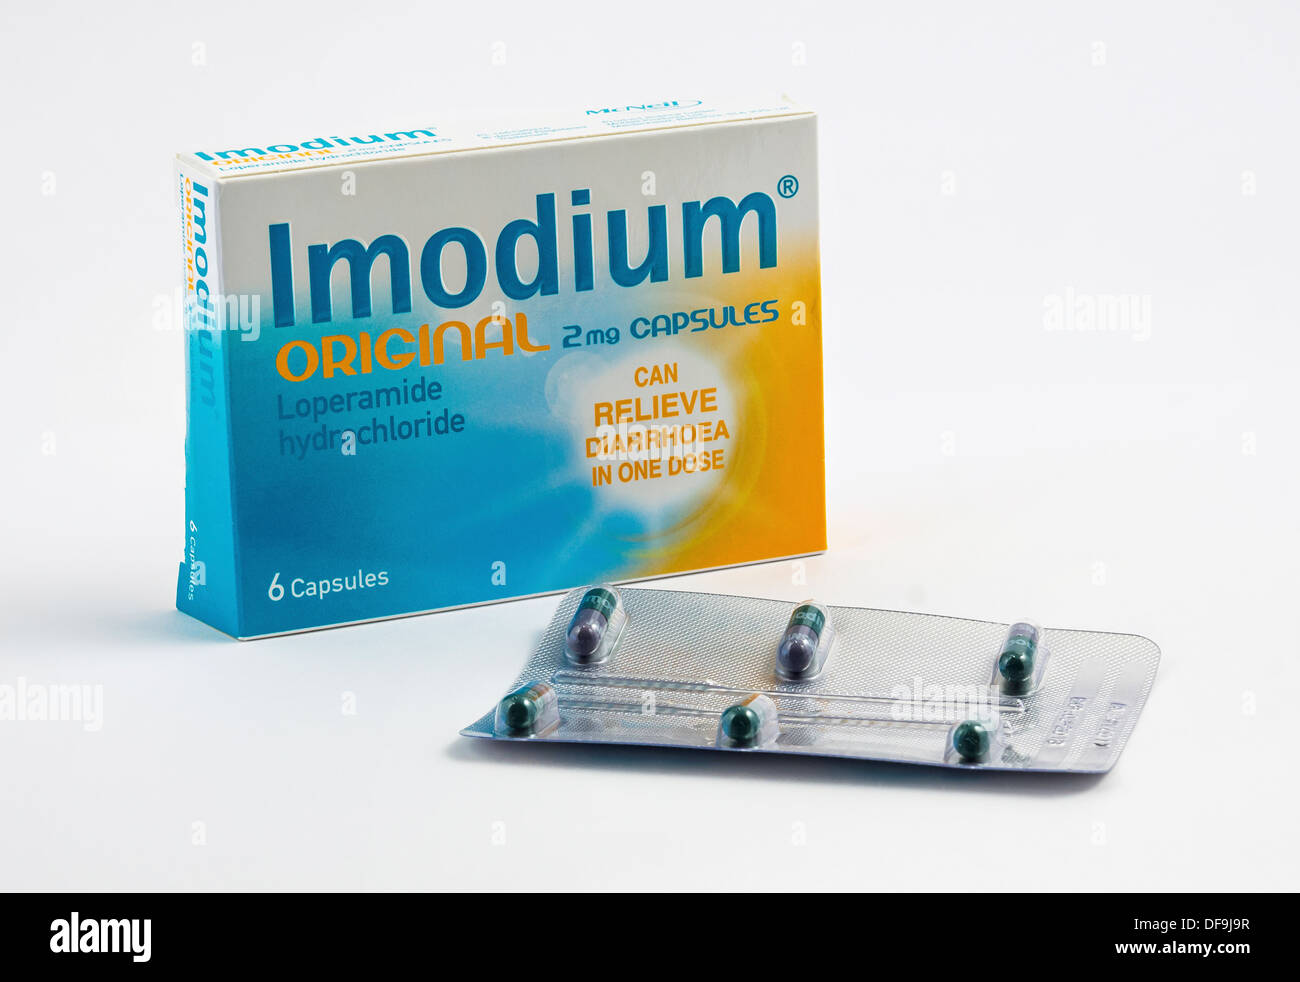 Imodium packet and capsules. used in treatment of diarrhoea. Stock Photo